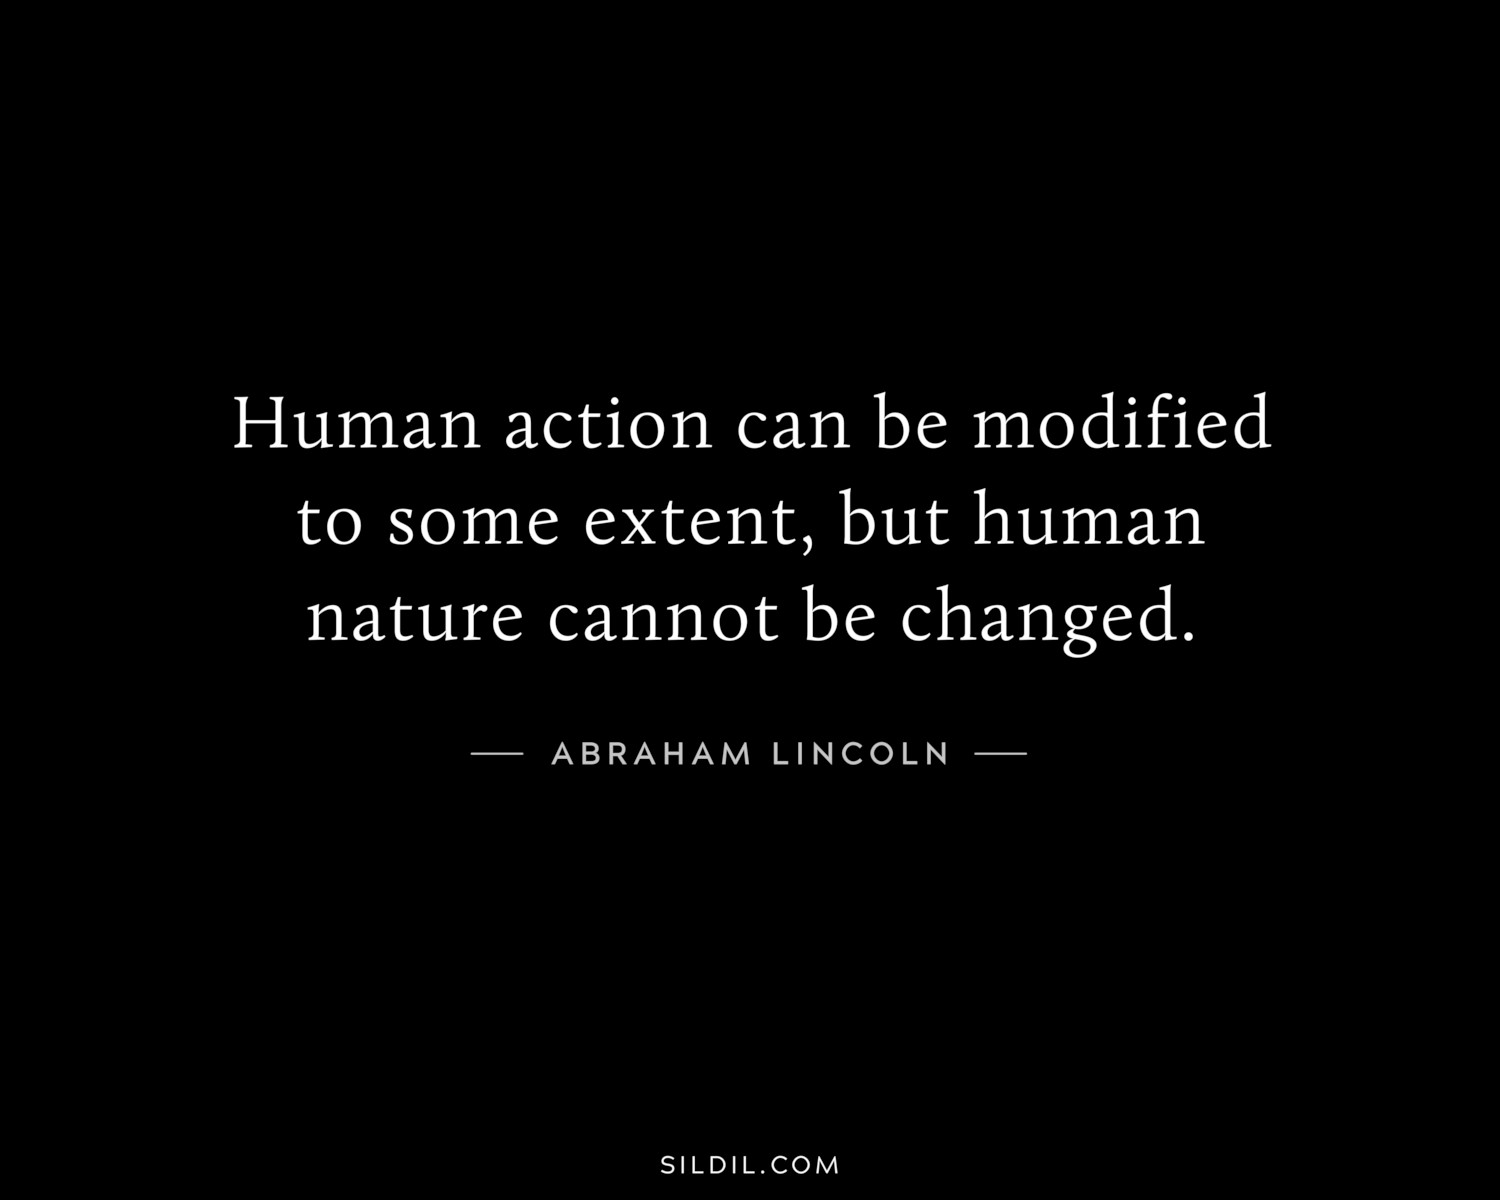 Human action can be modified to some extent, but human nature cannot be changed.